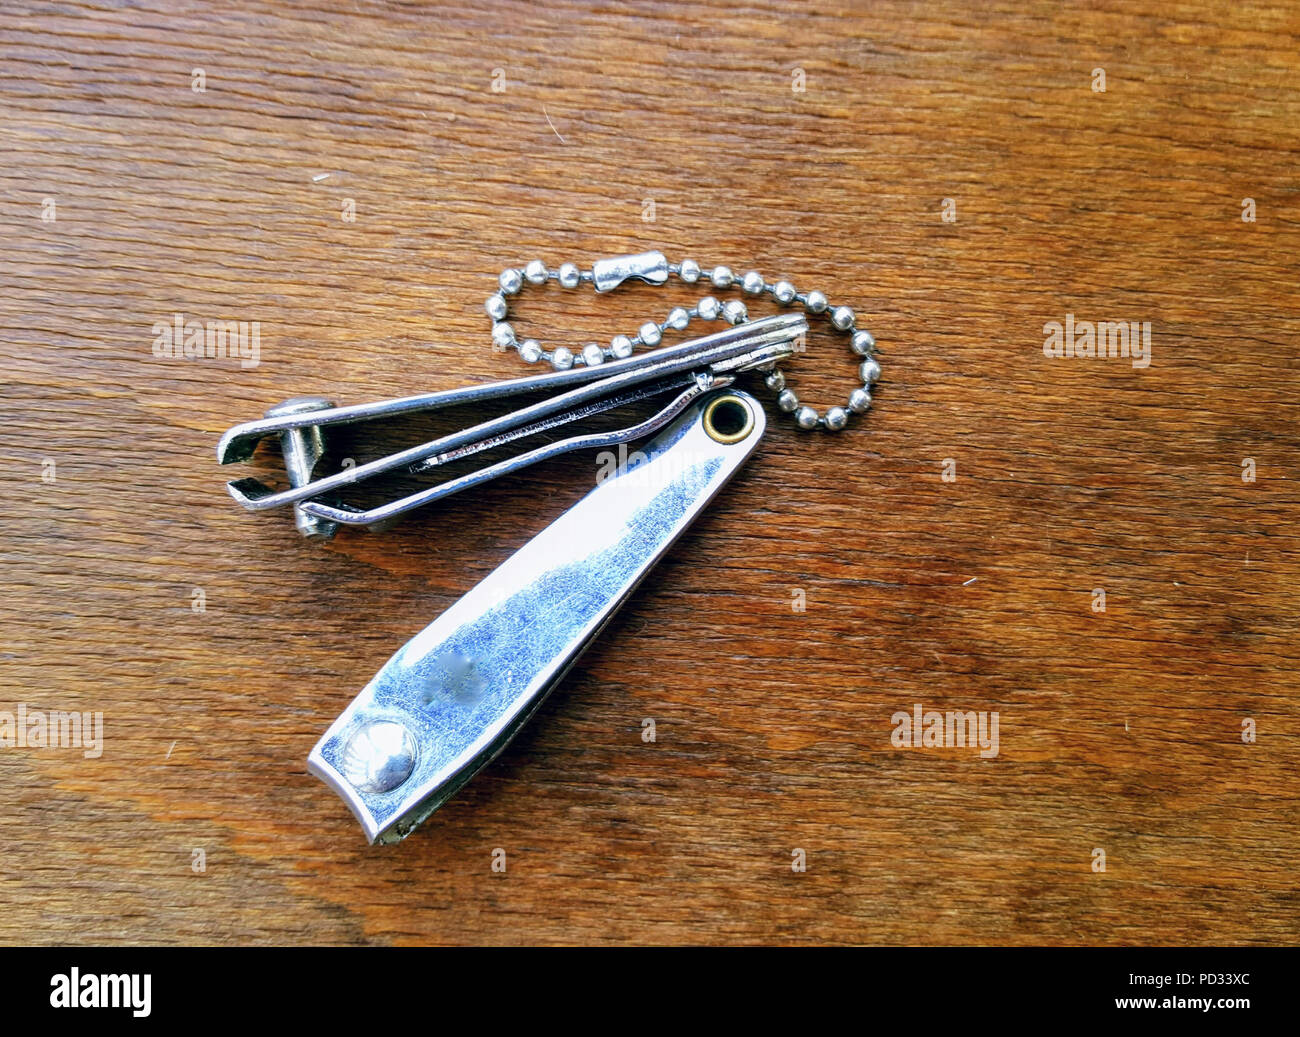 Finger nail scissors and toe nail clippers Stock Photo - Alamy